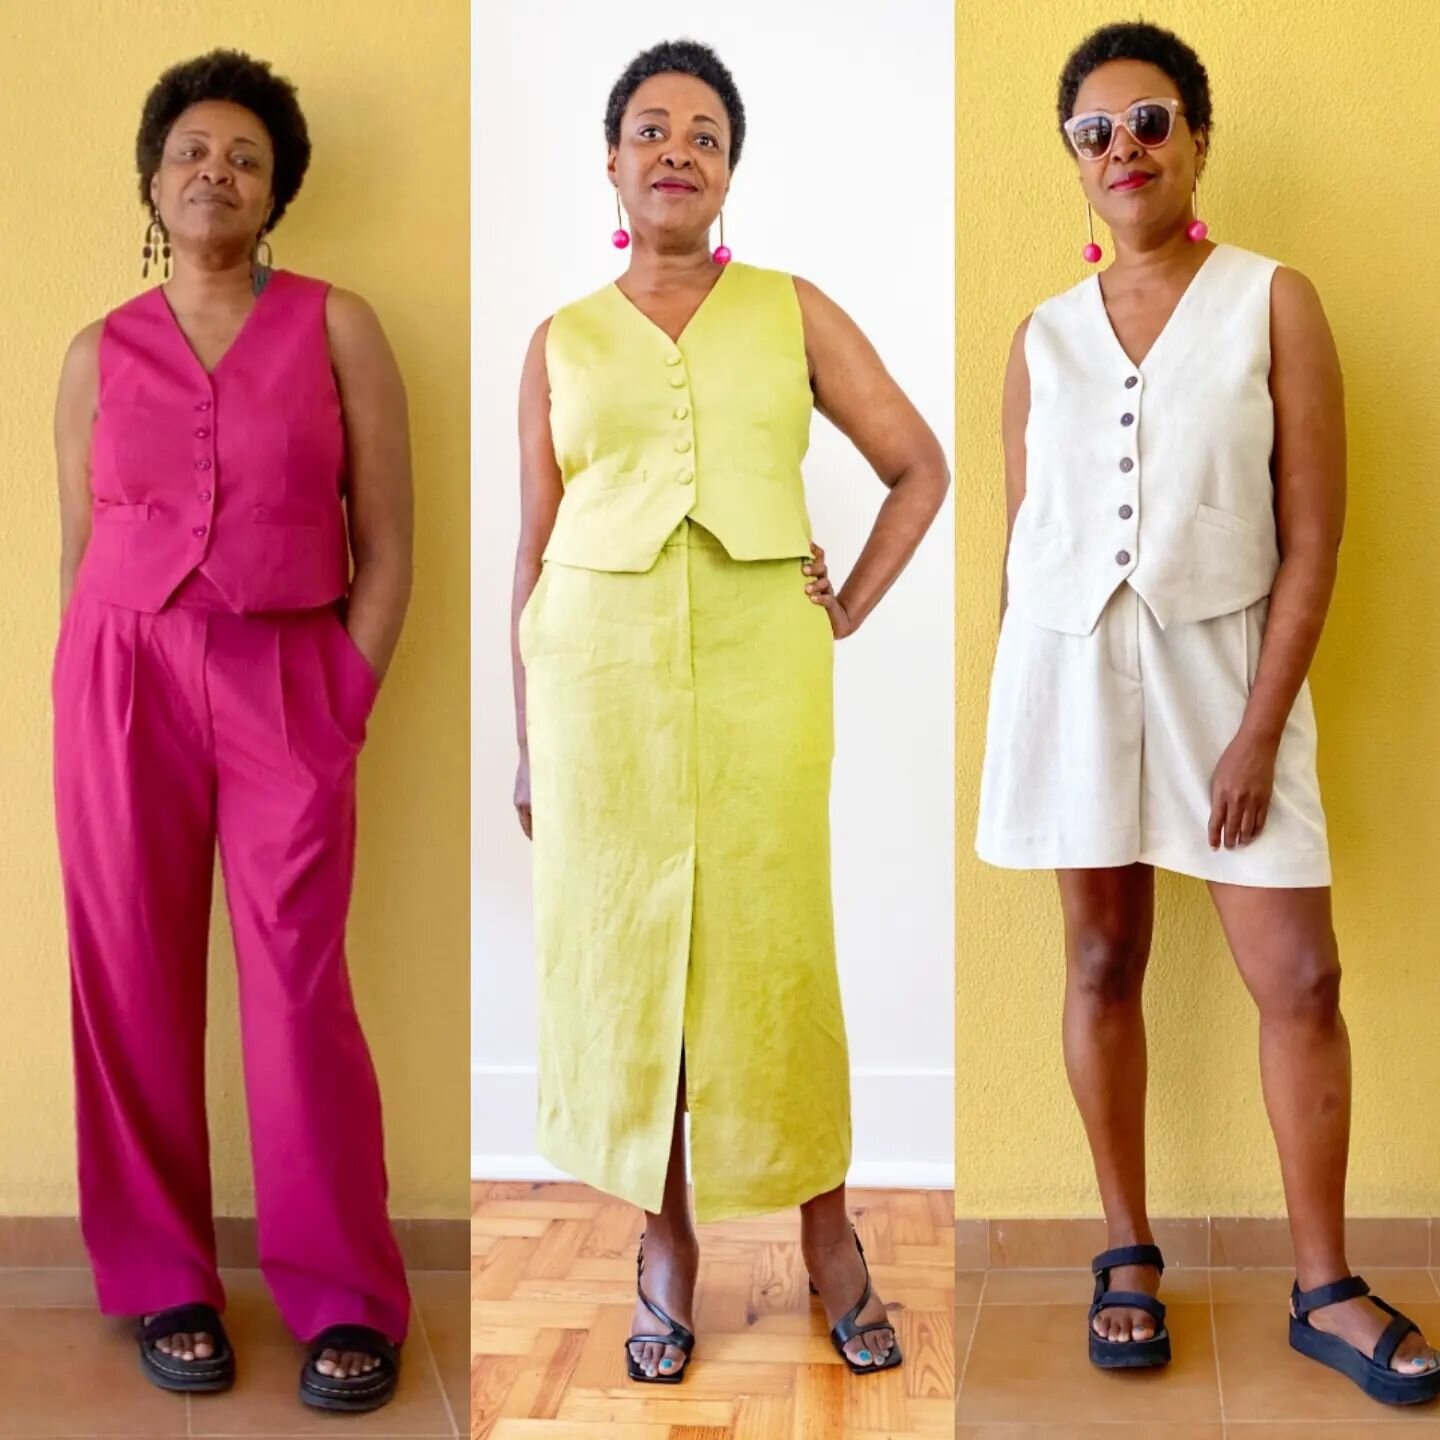 I sewed the looks and so can you. And it requires little to no hacking. How awesome is that?

Swipe to see the inspos behind these 3 waistcoat sets. 

This year, I fully immersed myself into the waistcoat trend thanks to the wonderful indie patterns 